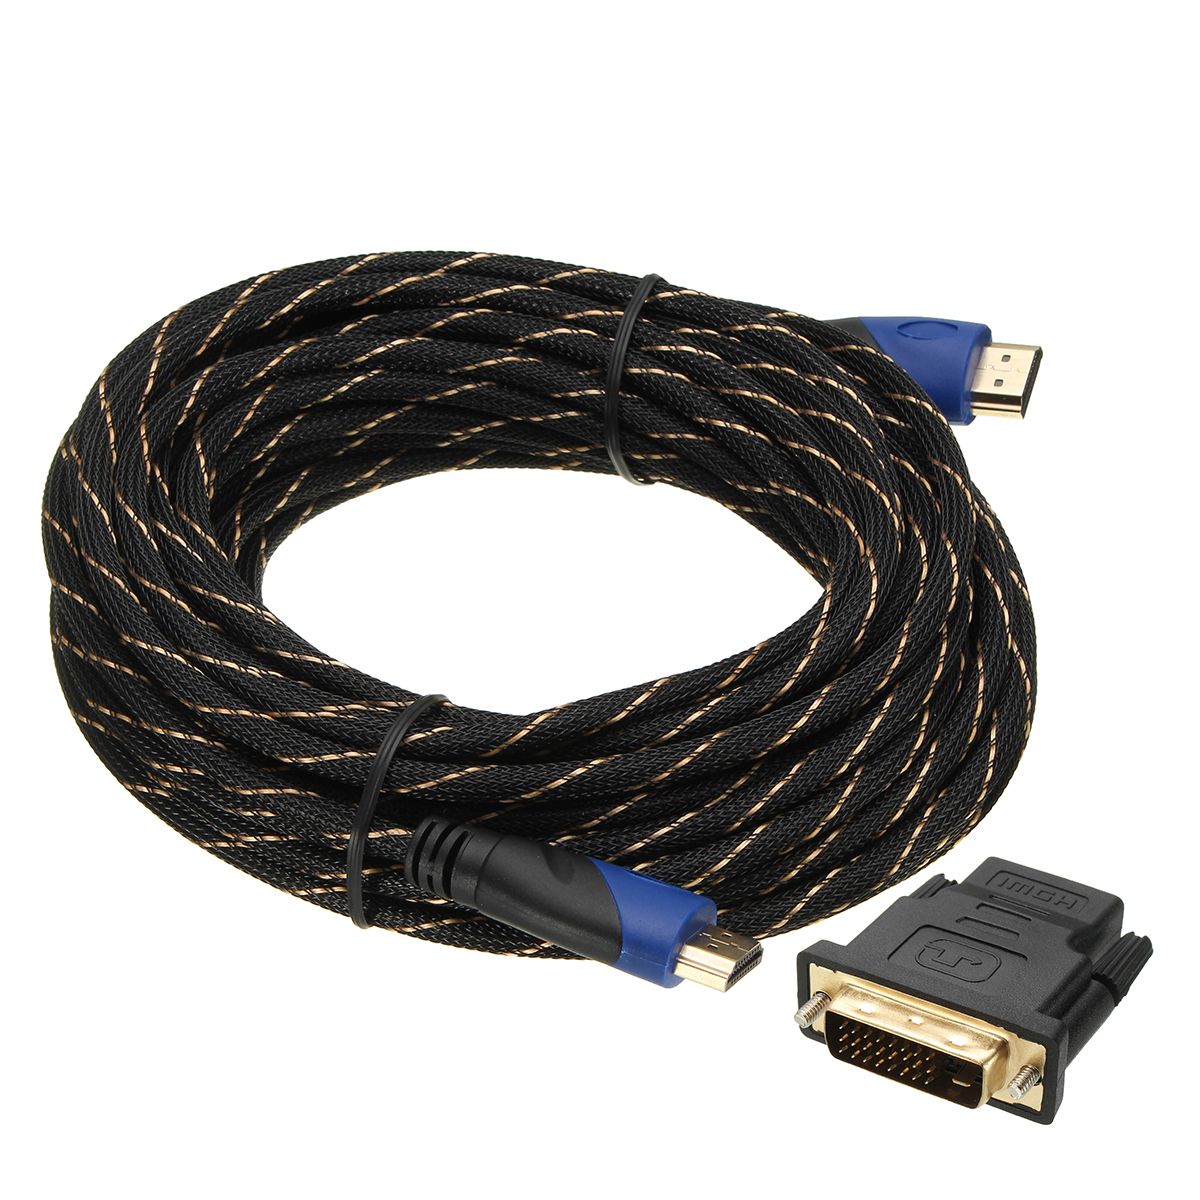 Braided-HD-Cable-V14-1080P-HD-3D-for-PS3-Xbox-HDTV-with-DVI-Connector-1223209